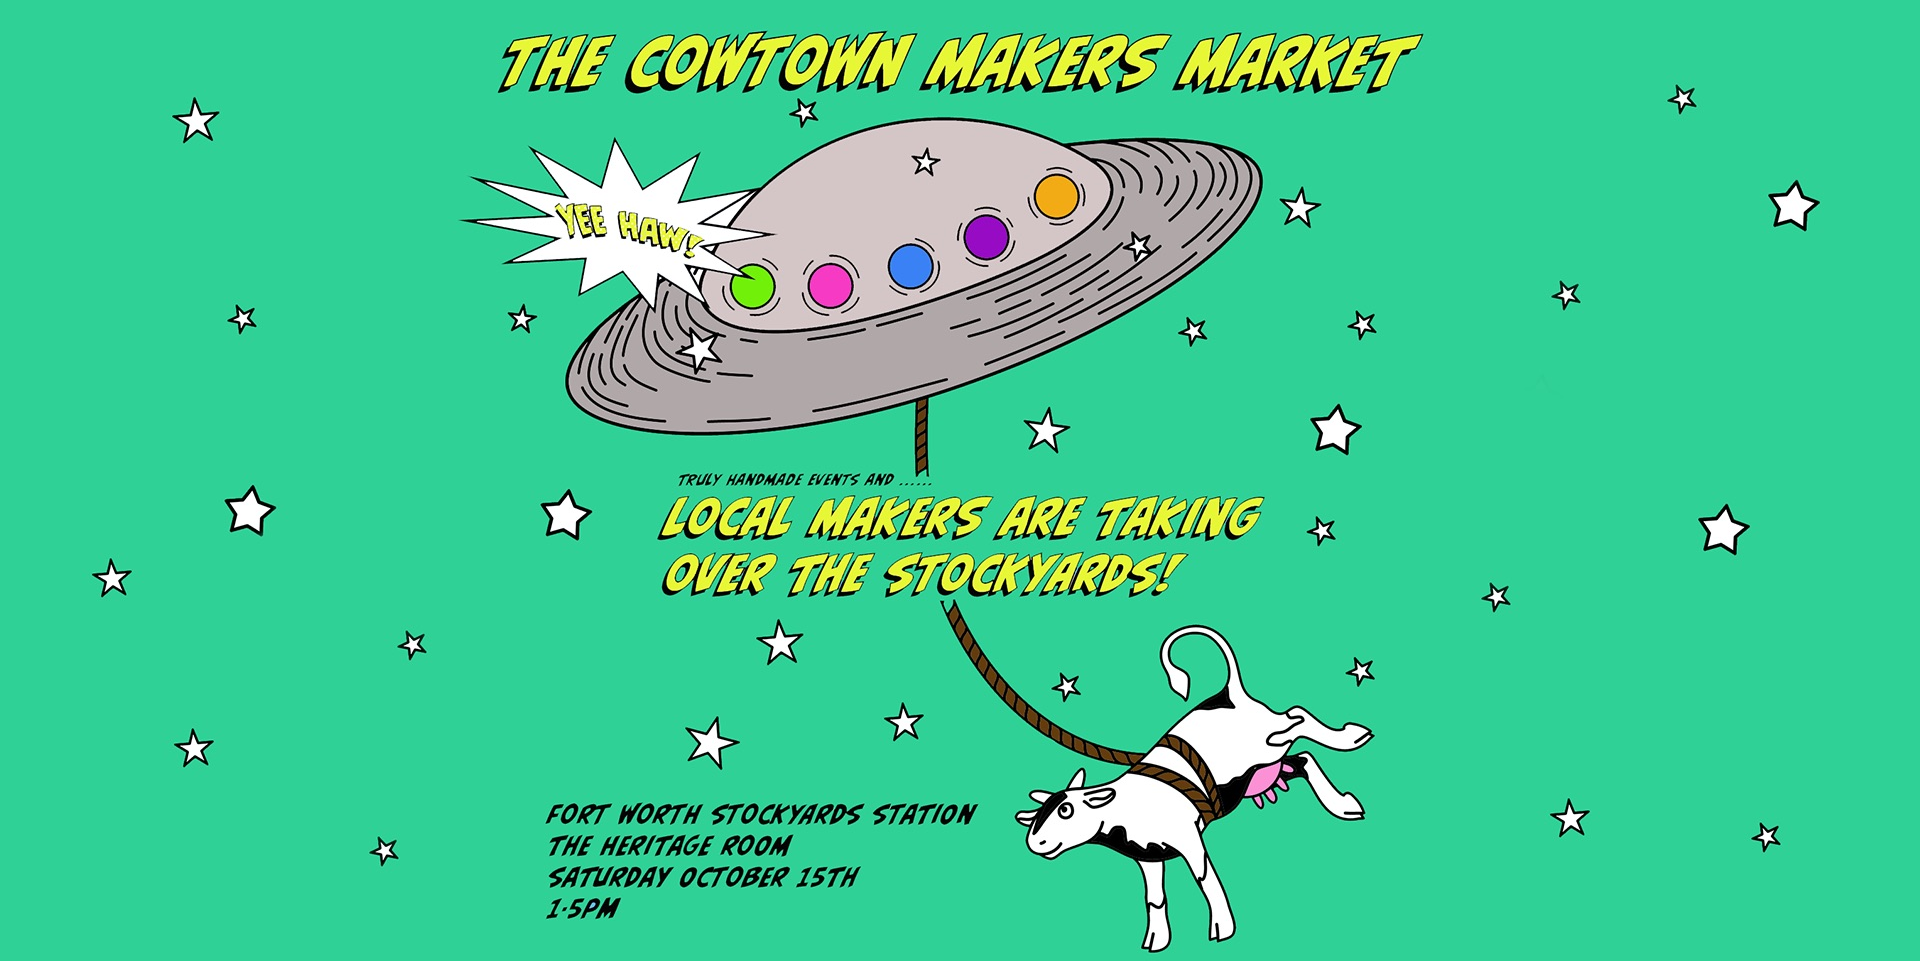 The Cowtown Makers Market promotional image